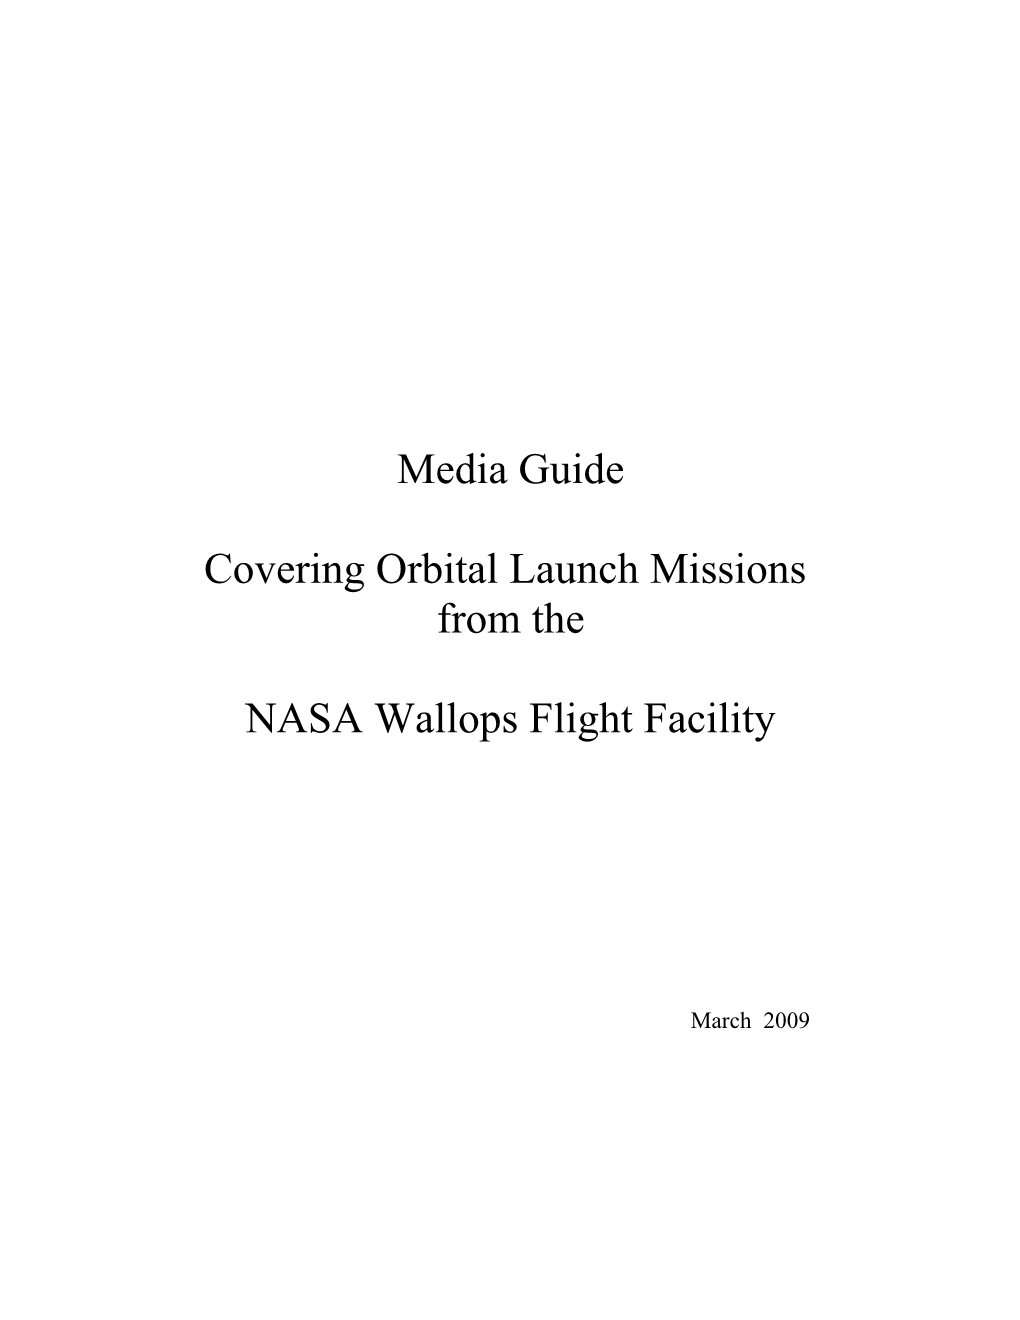 Covering Orbital Launch Missions